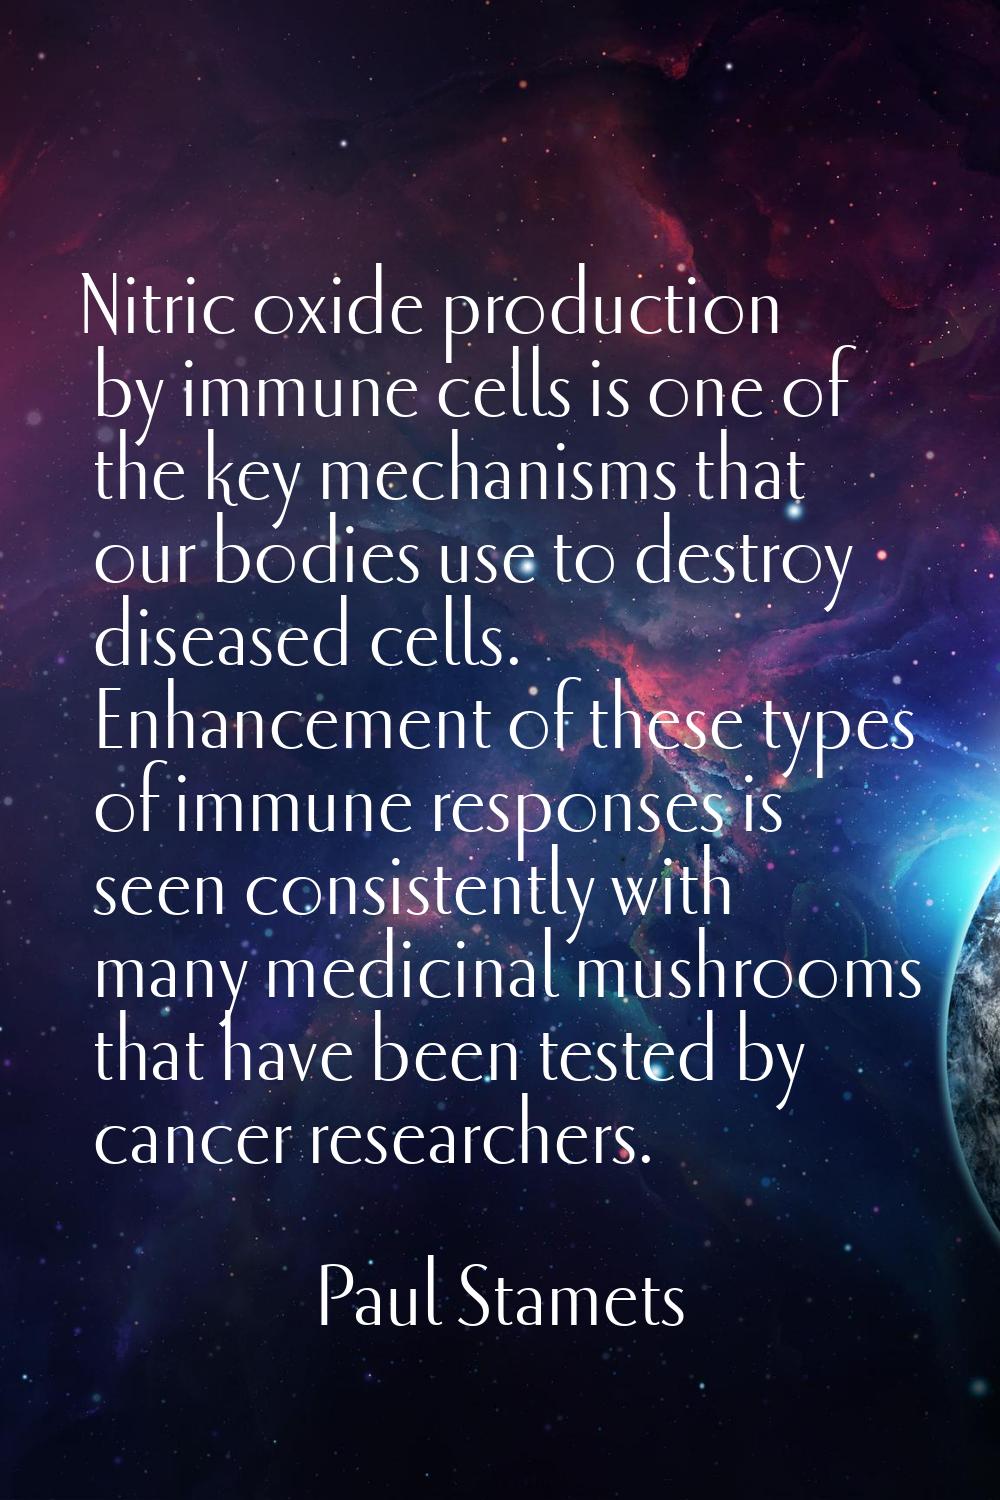 Nitric oxide production by immune cells is one of the key mechanisms that our bodies use to destroy